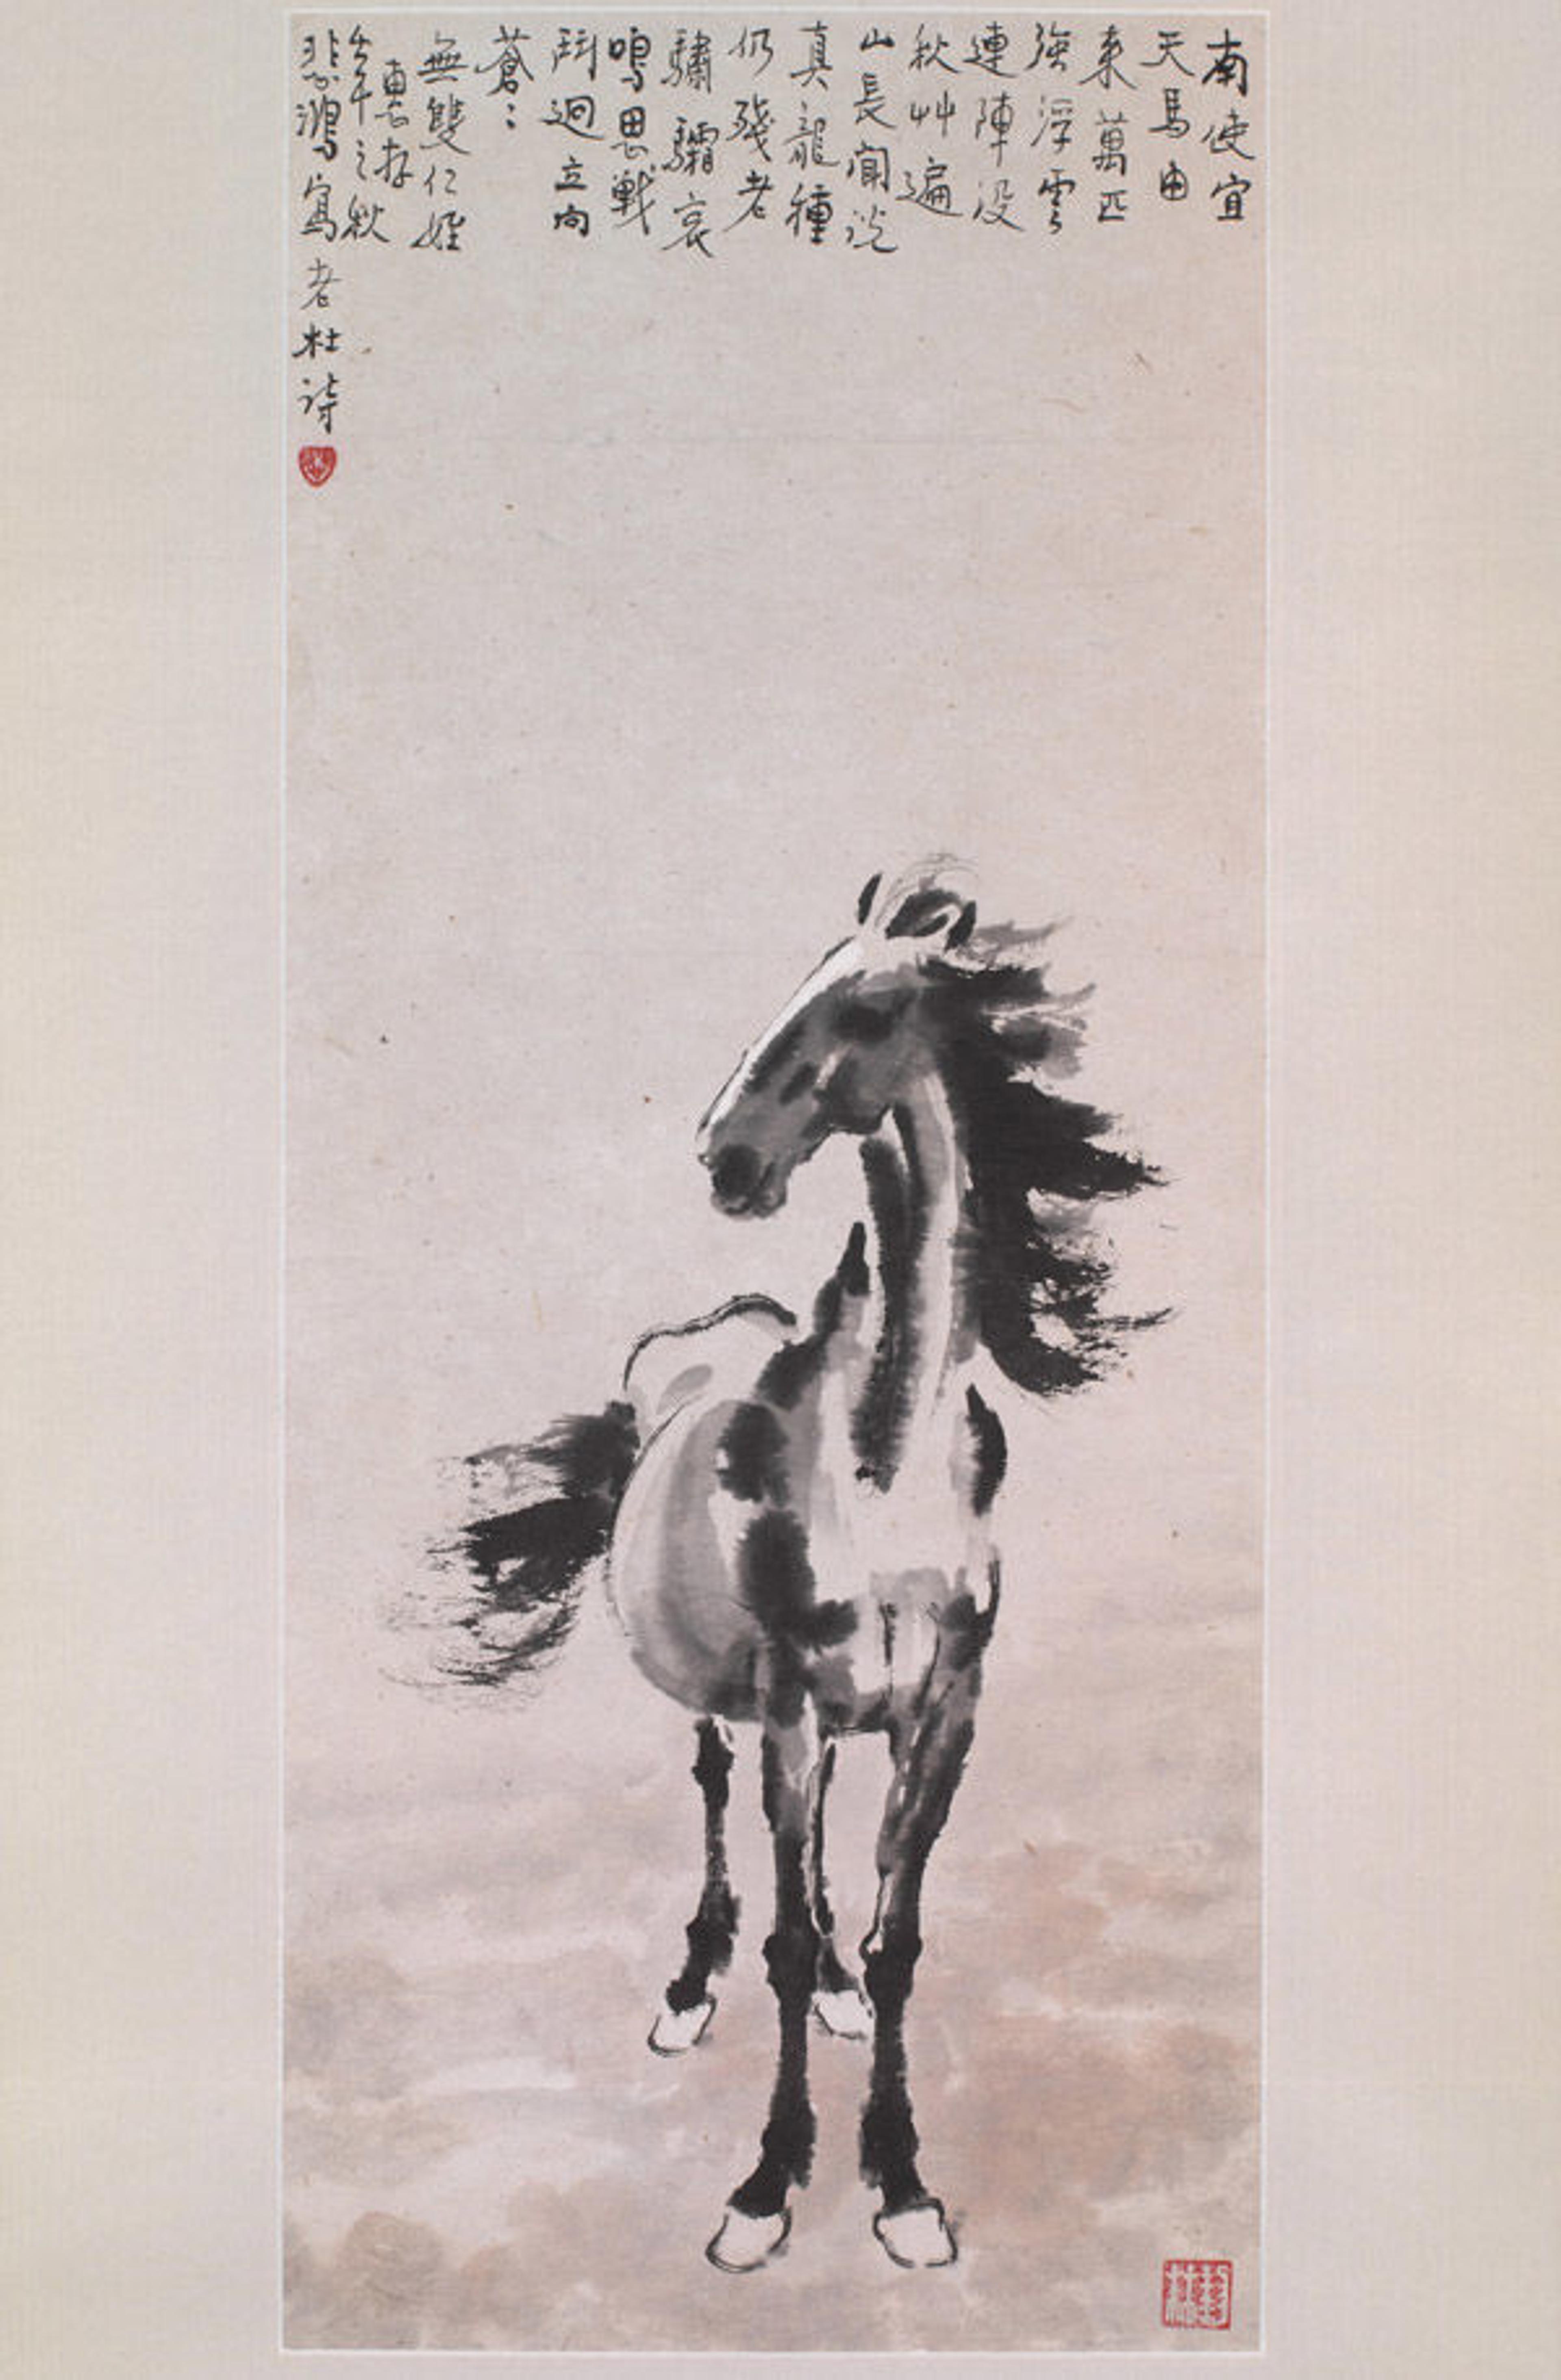 Xu Beihong (Chinese, 1895–1953). Heavenly Horse, dated 1942. Republic period. China. Hanging scroll, ink on paper; Image: 26 5/8 x 11 1/8 in. (67.6 x 28.3 cm) Overall with mounting: 89 x 18 1/8 in. (226.1 x 46 cm) Overall with knobs: 89 x 21 in. (226.1 x 53.3 cm). The Metropolitan Museum of Art, New York, The Lin Yutang Family Collection, Gift of Richard M. Lai, Jill Lai Miller, and Larry C. Y. Lai in memory of Taiyi Lin Lai, 2005 (2005.509.15)